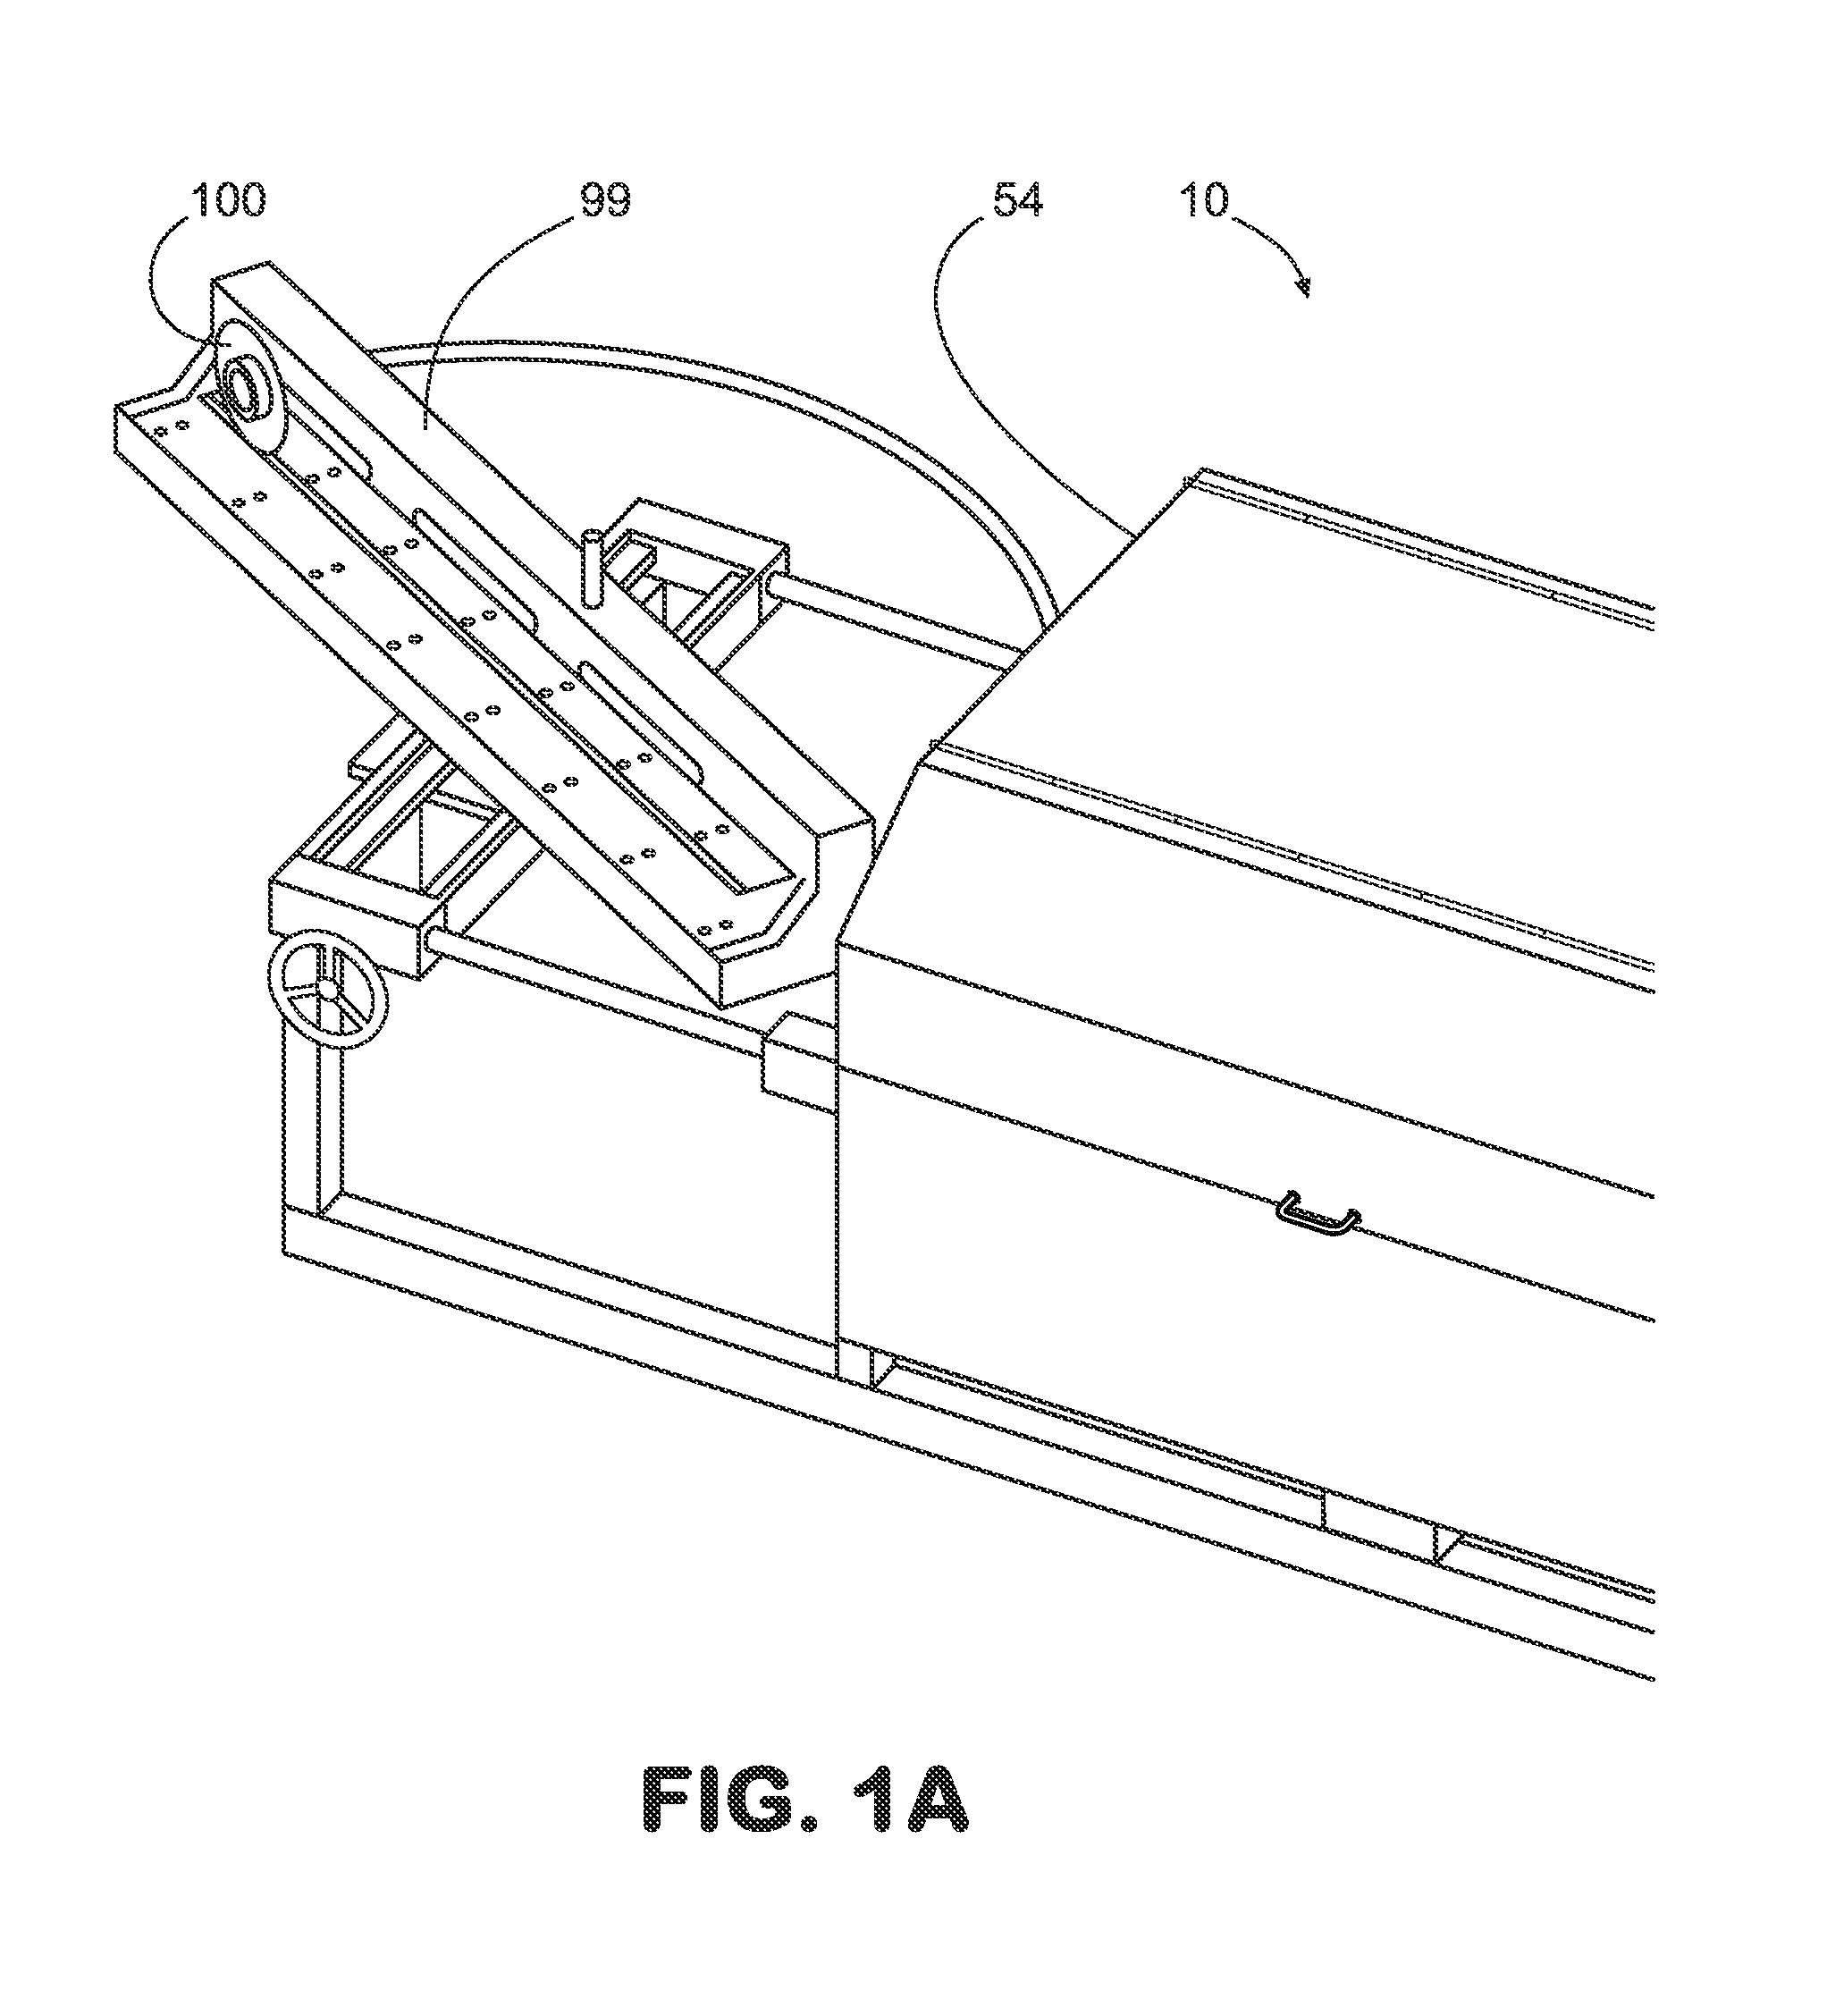 Probrammable Rollfromer for Combining an Architectural Sheet with a Solar Panel and Method